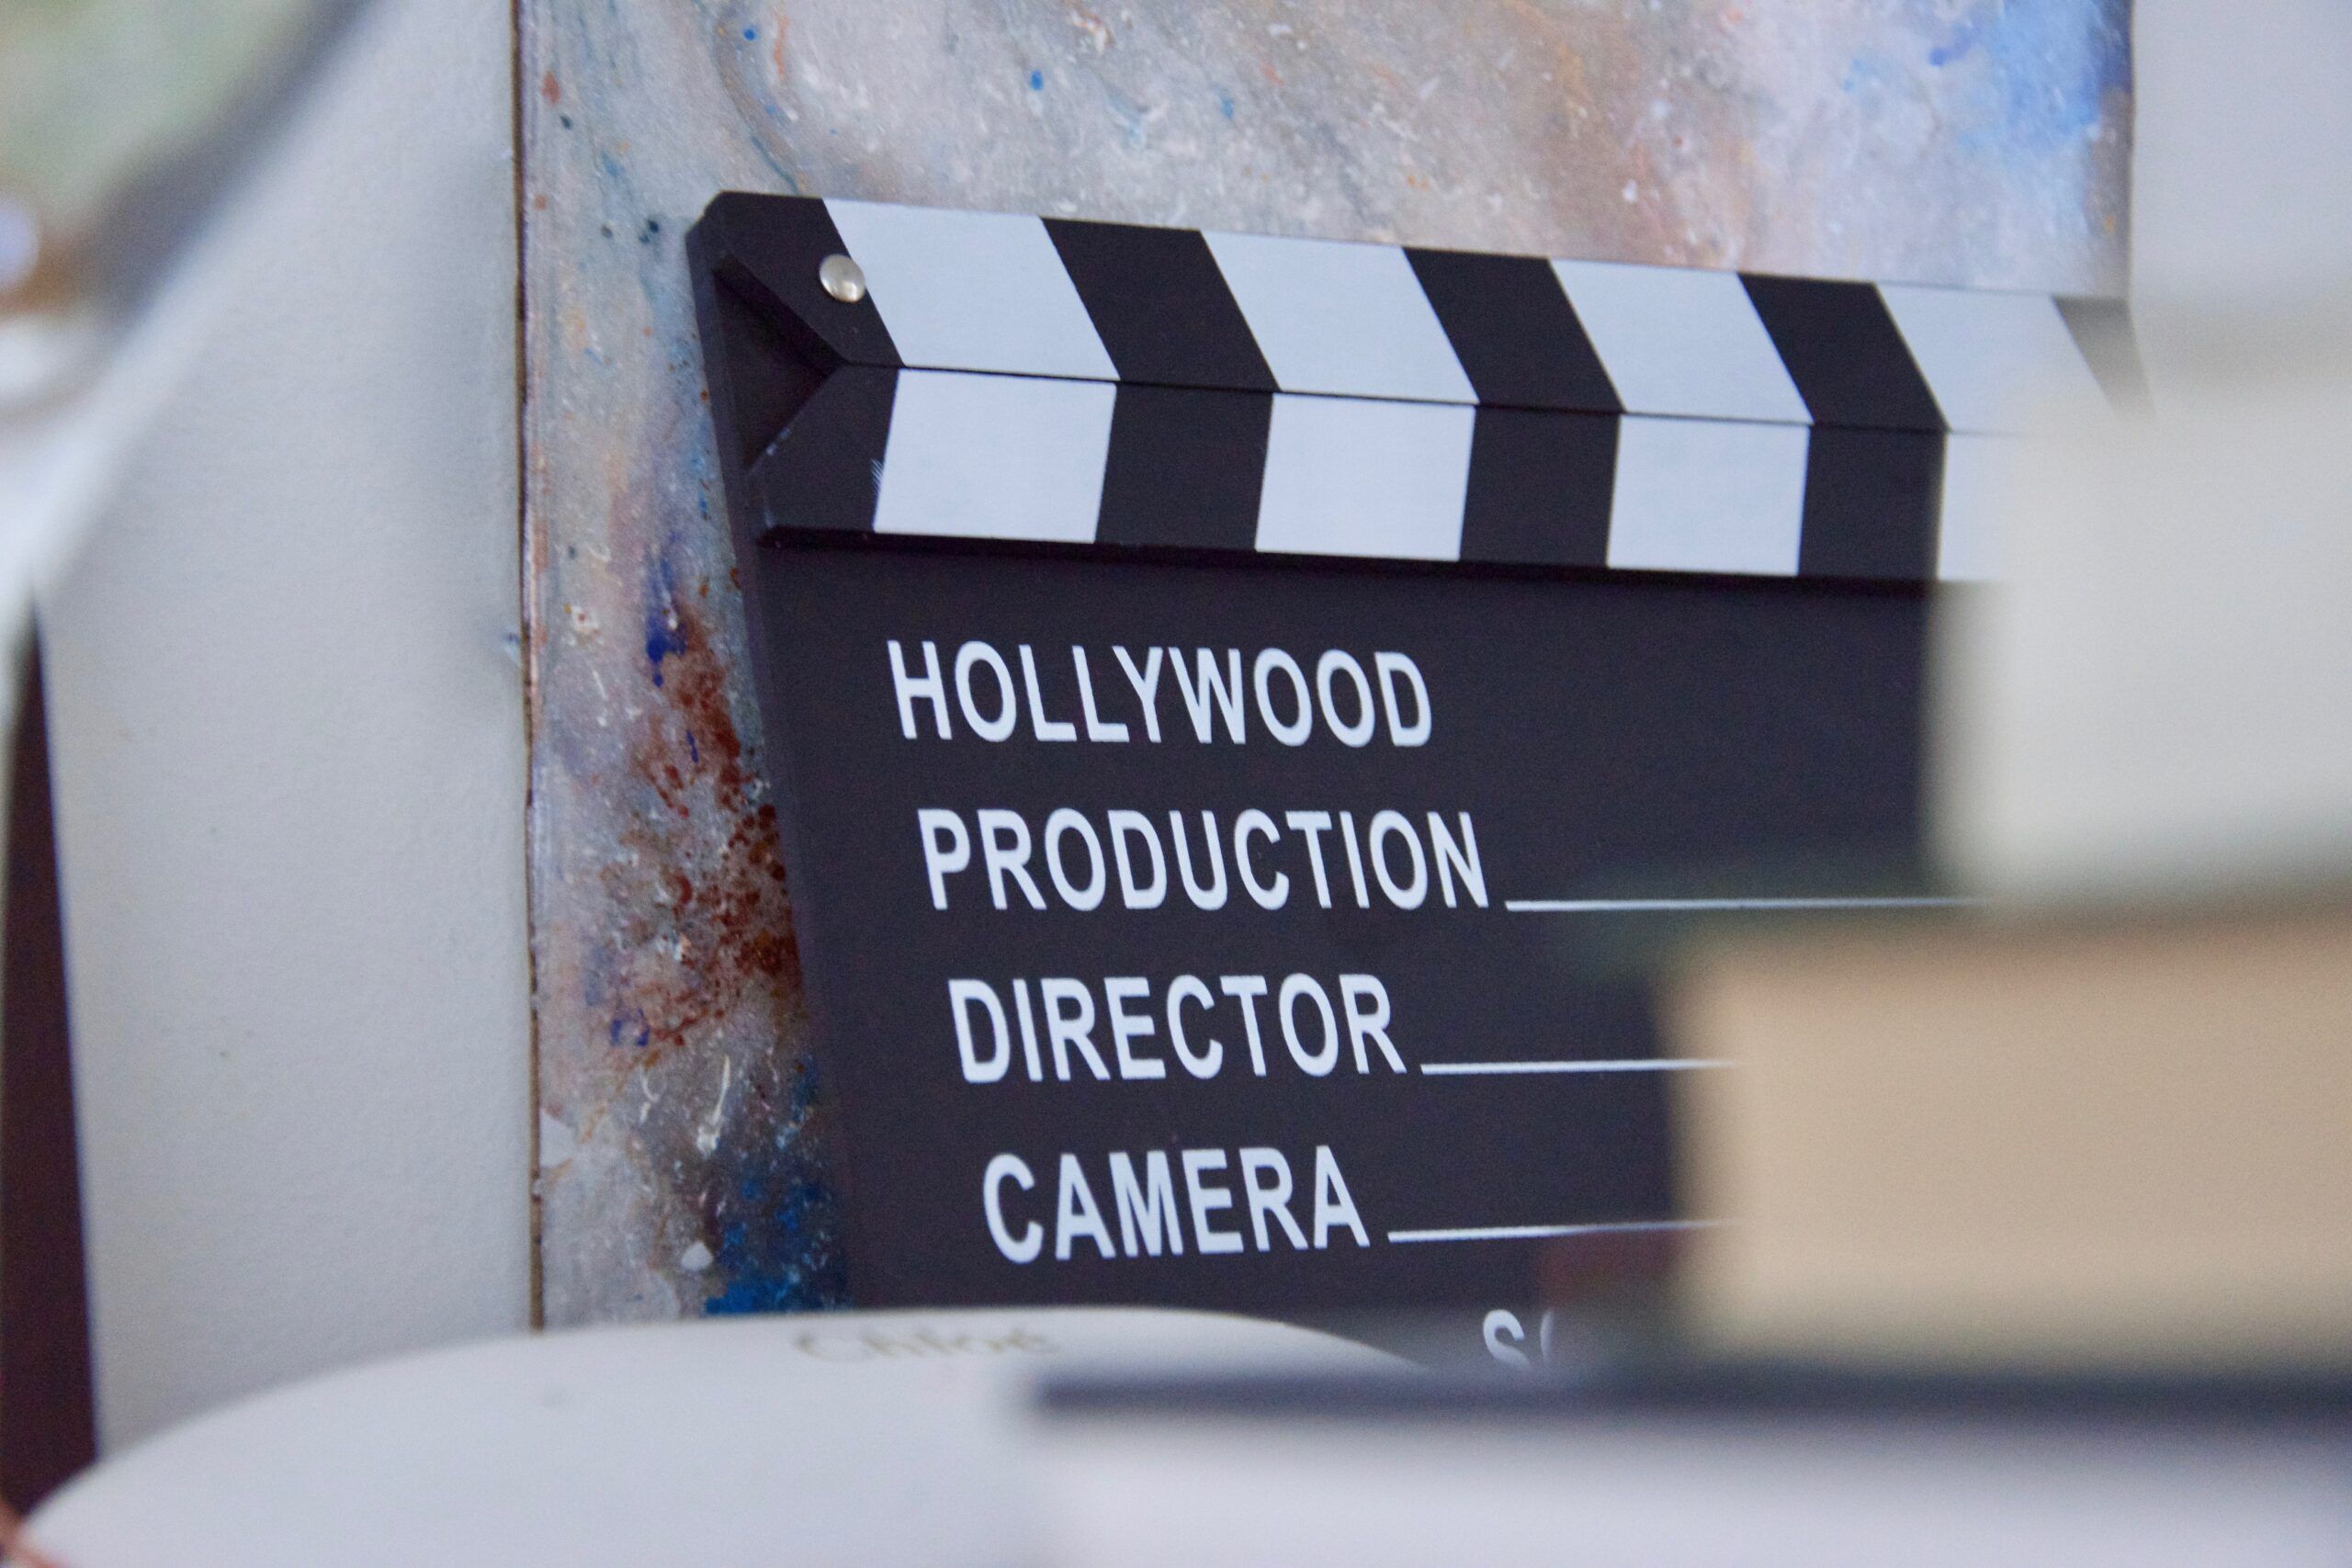 Black and white clapper board with writing that says Hollywood, Production, Director, Camera